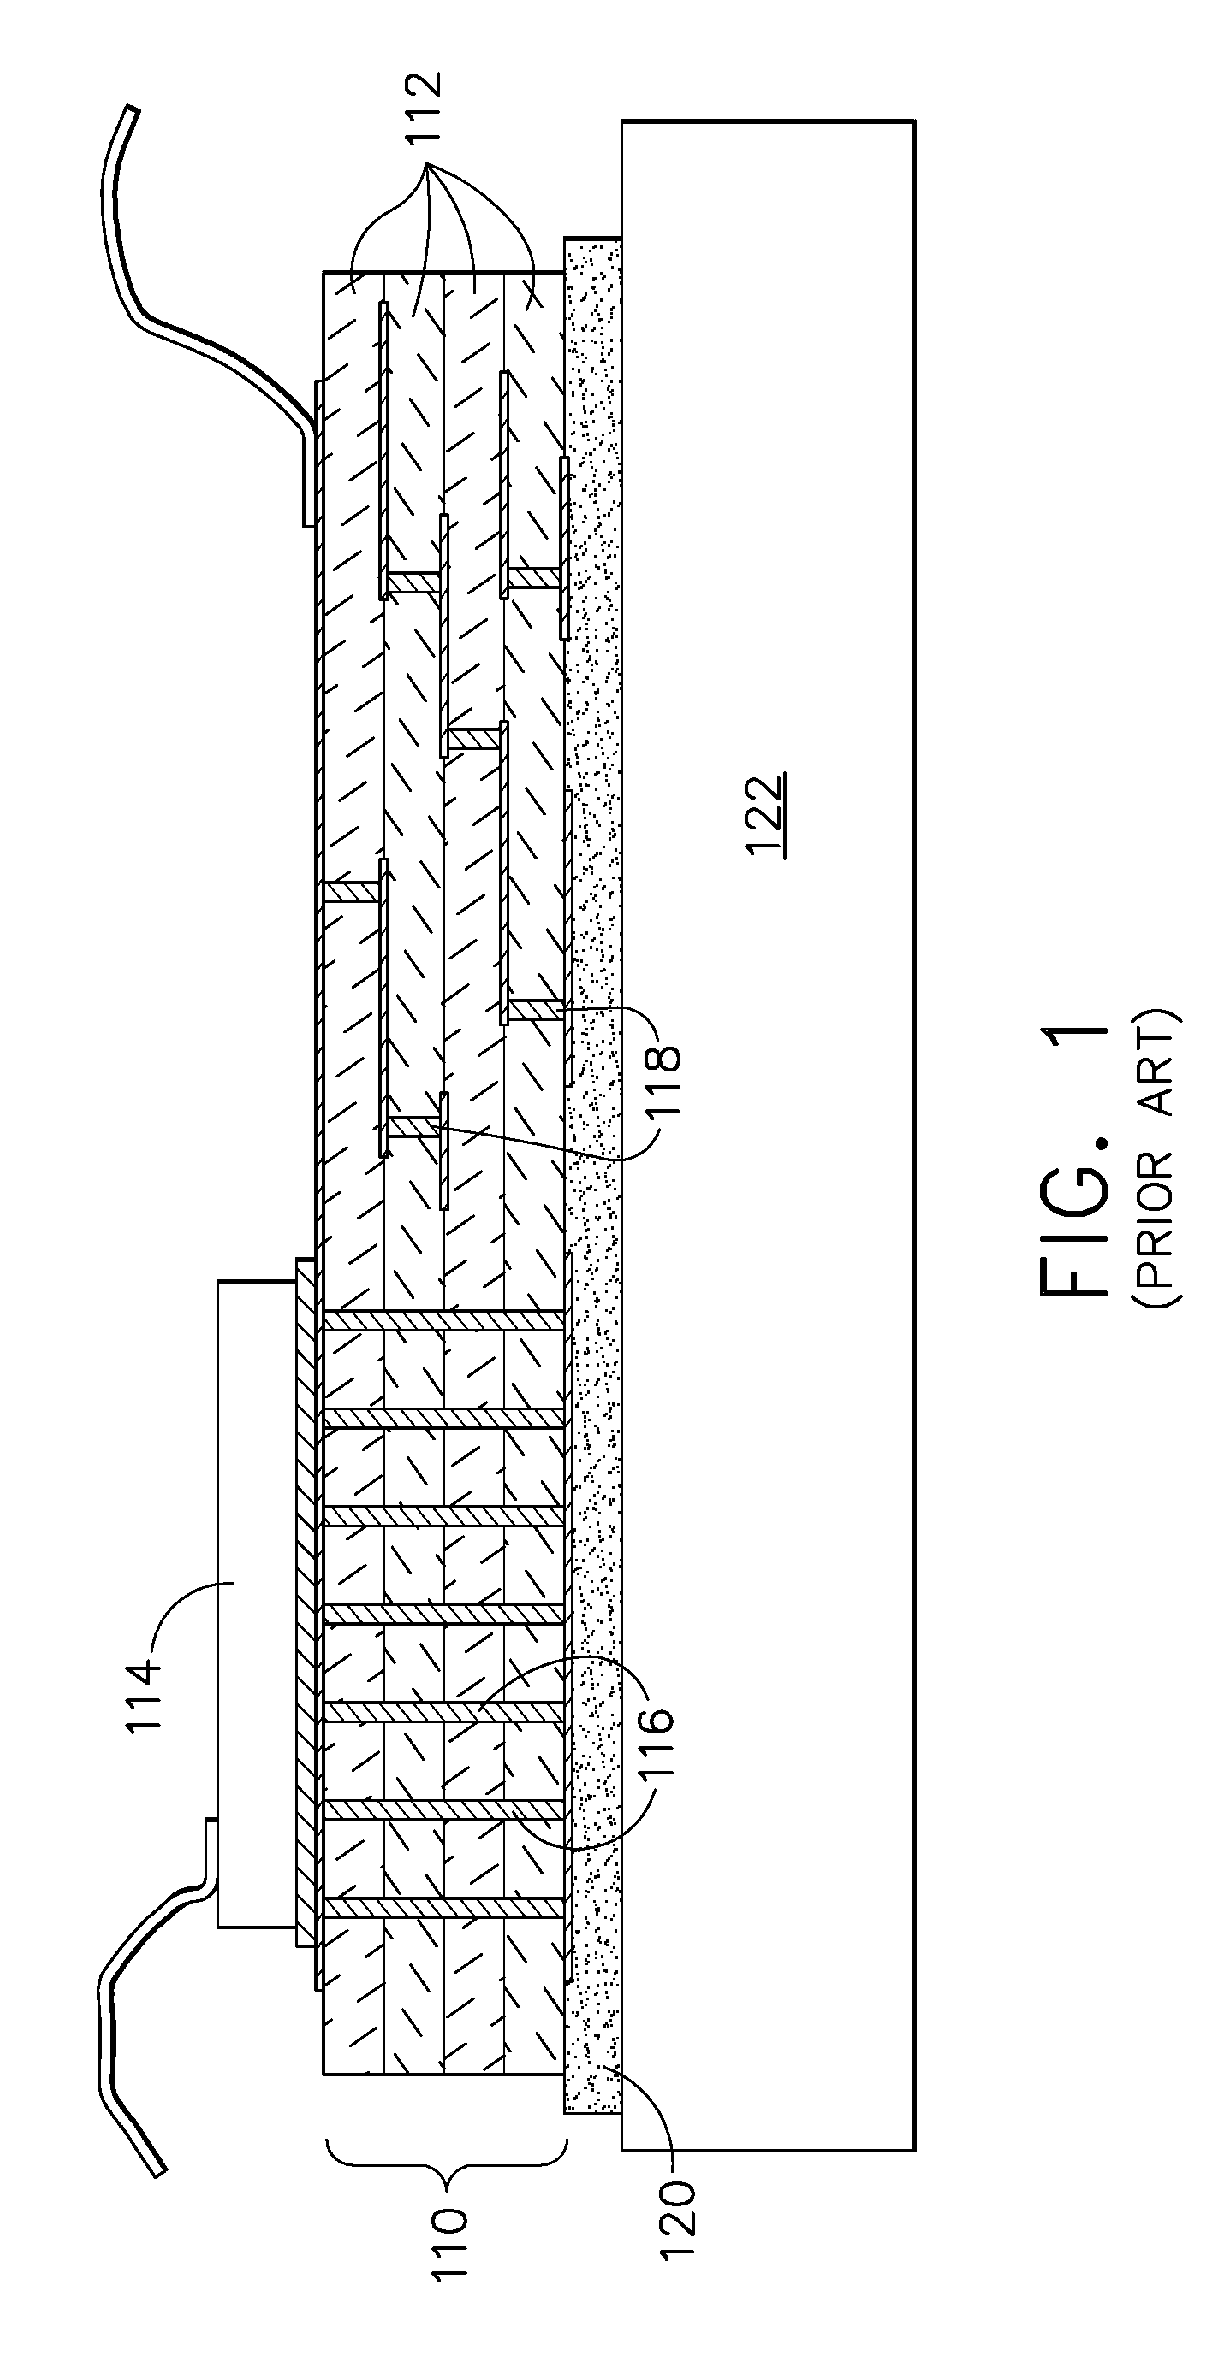 Thermal management of surface-mount circuit devices